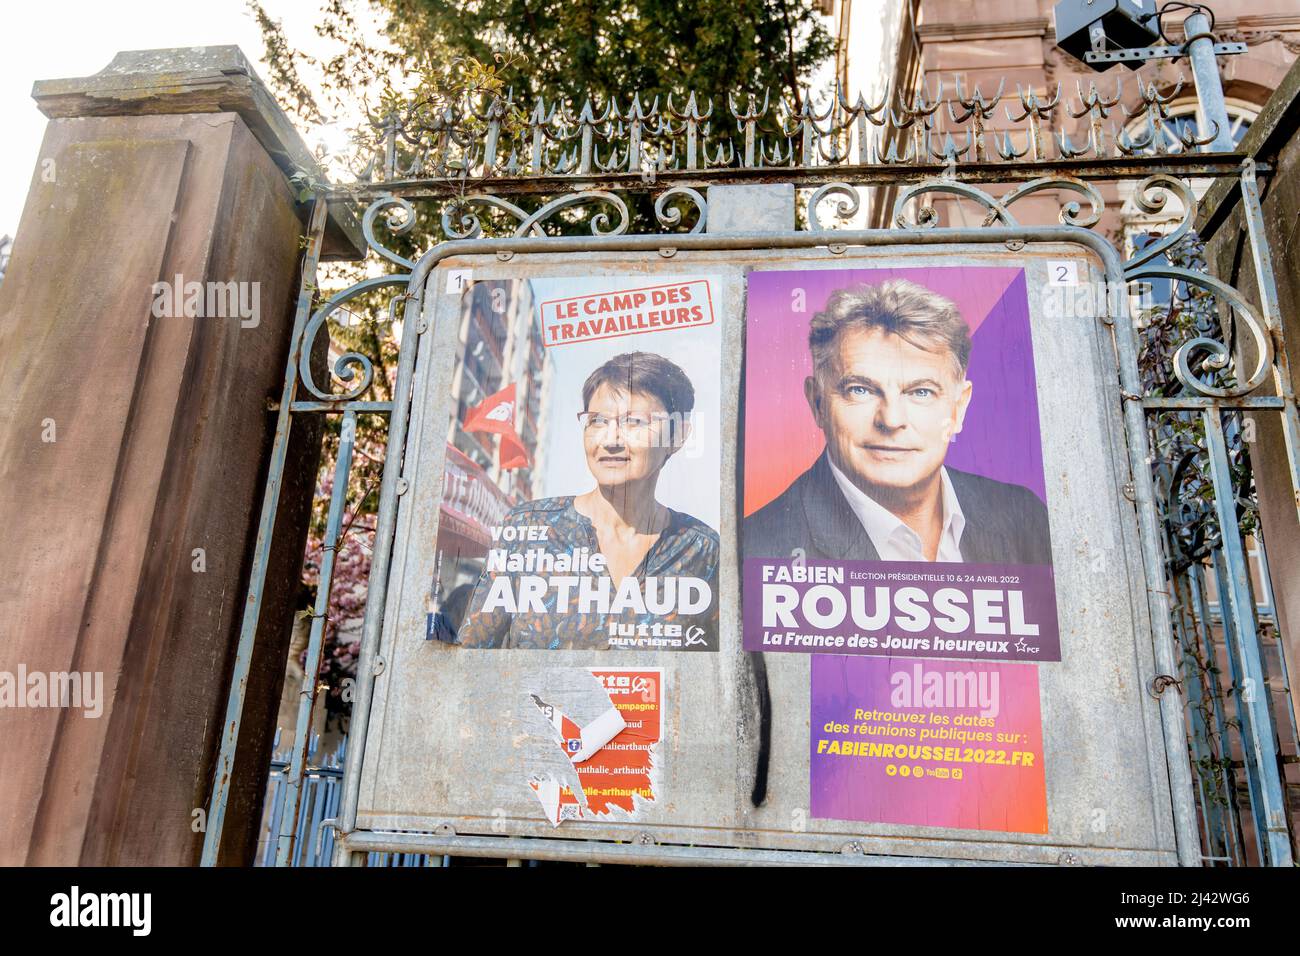 STRASBOURG, FRANCE - APR 23, 2022: French presidential posters for the upcoming presidential election in France, in front of the City Hall building in Strasbourg featuring Nathalie Arthaud and Fabien Roussel Stock Photo